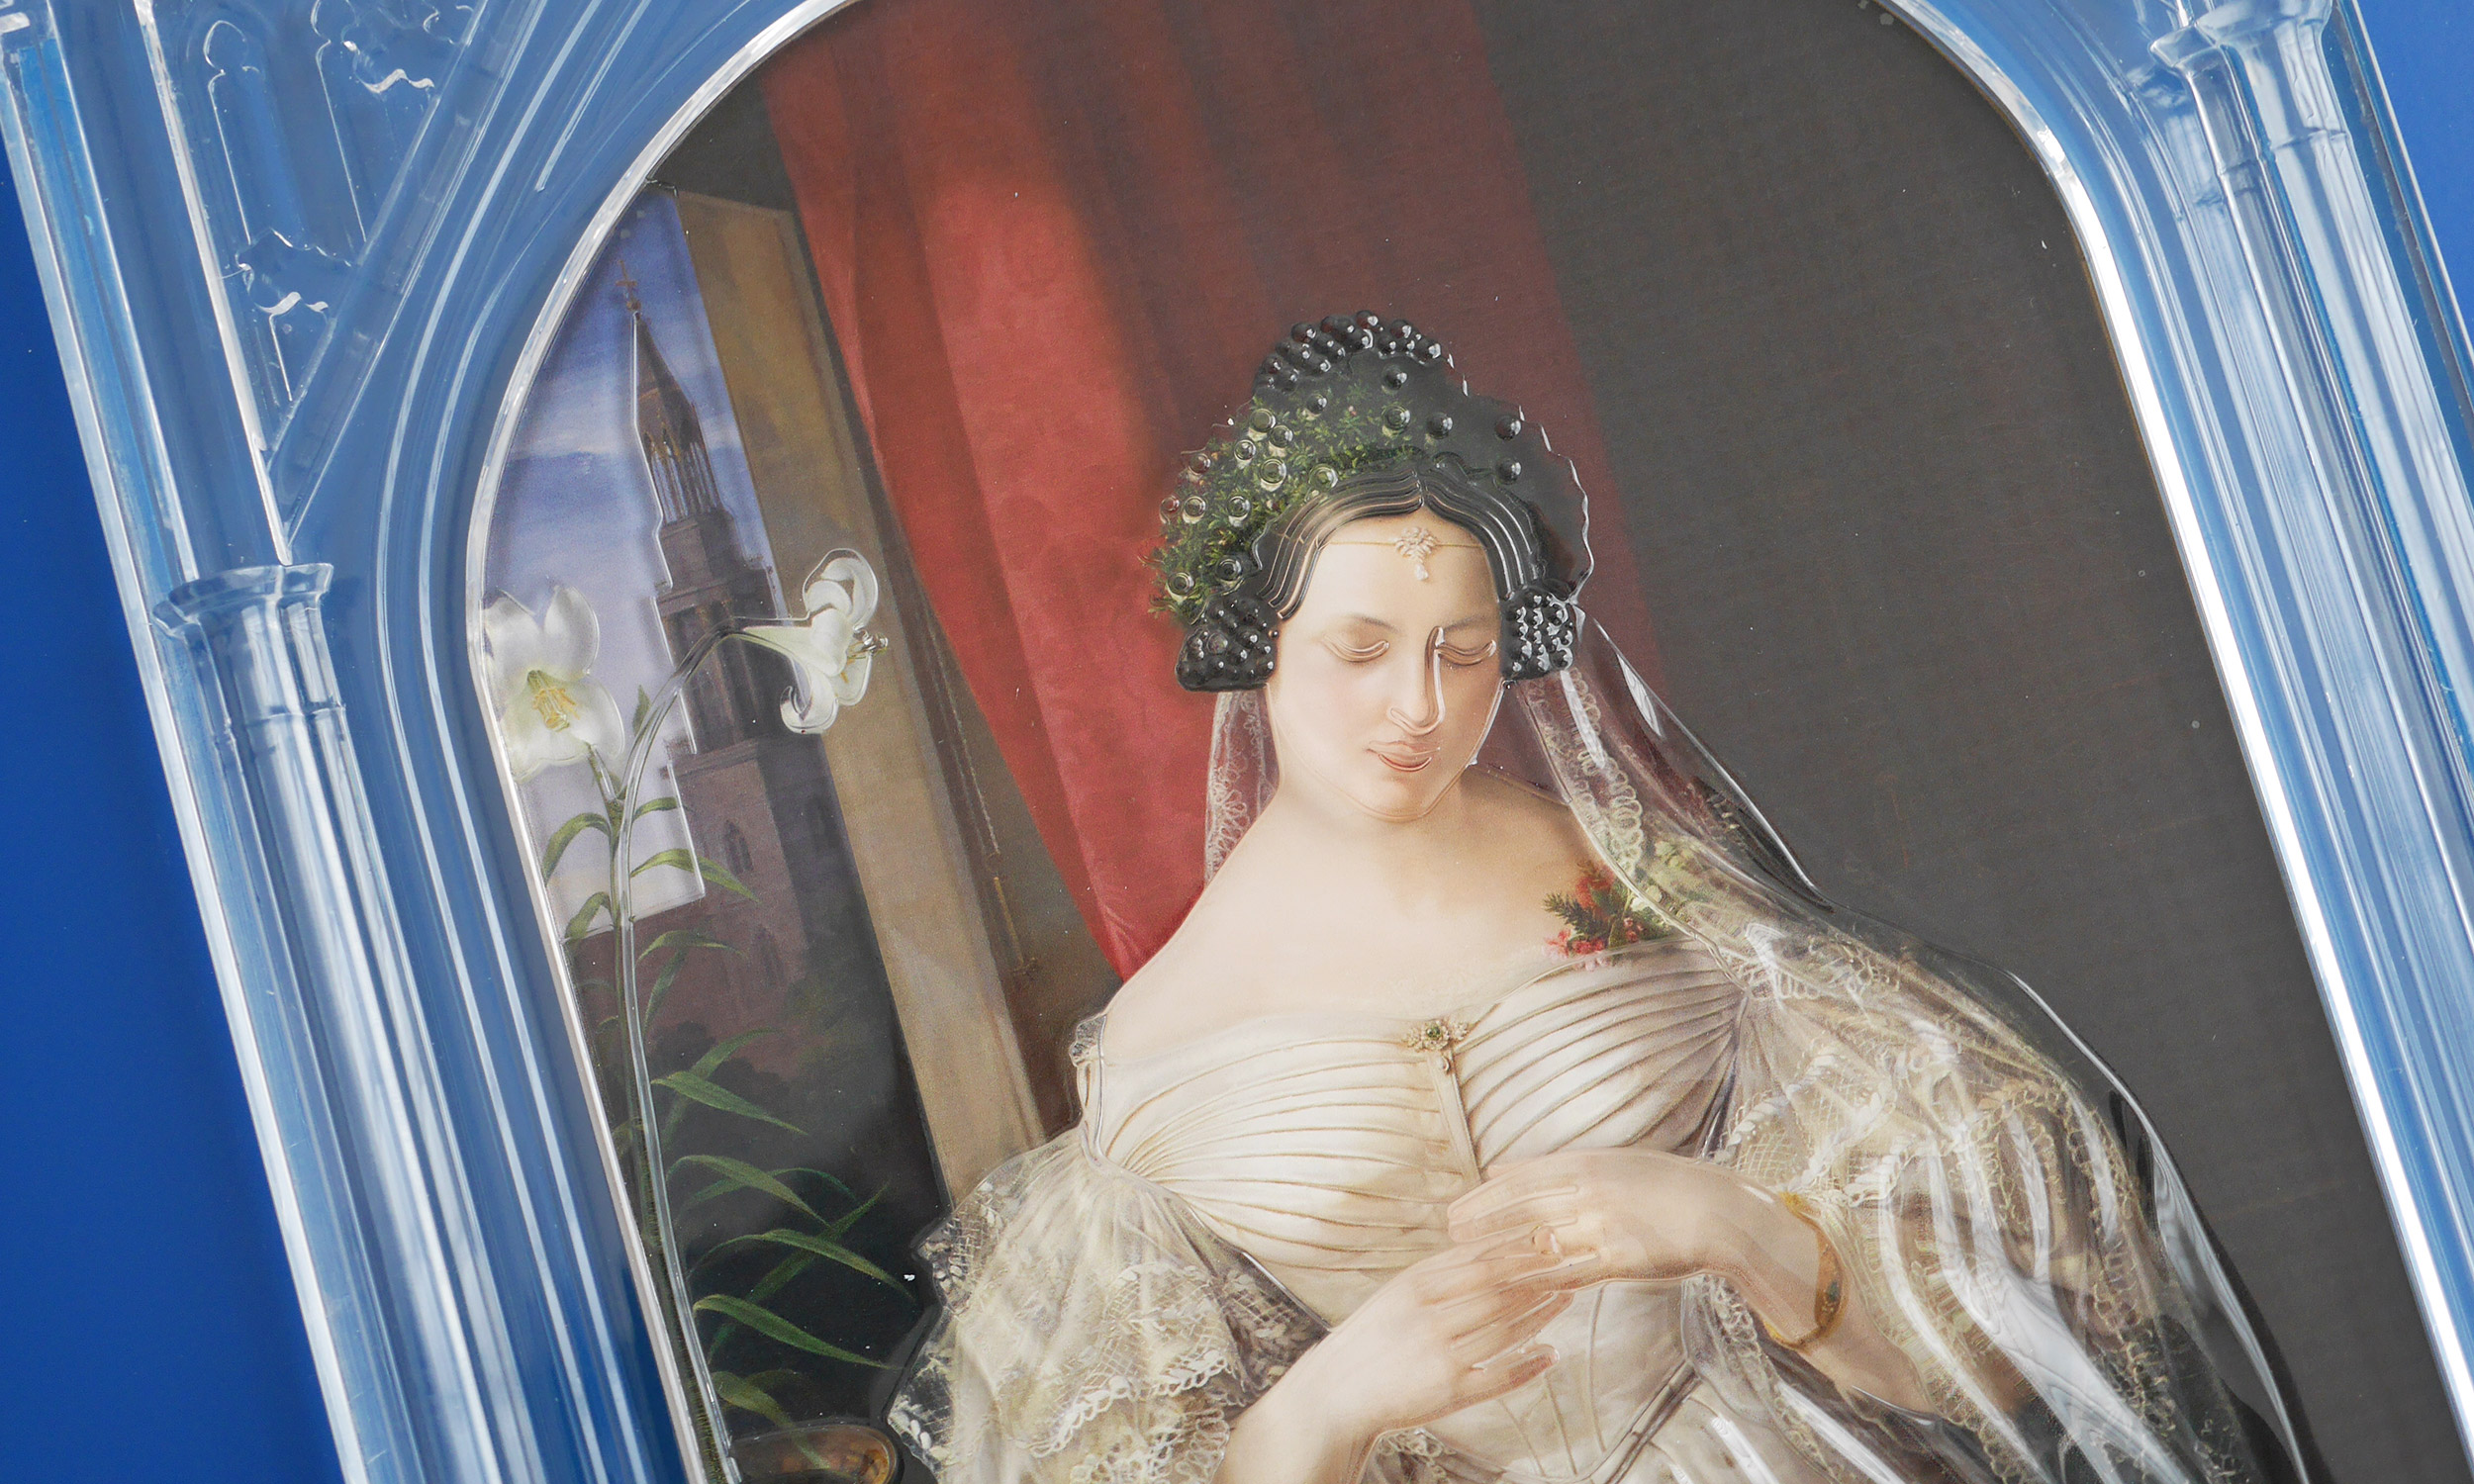 Detail photo of the upper part of a tactile model. The picture shows the painting "Albertine Heine as a bride" in the Jewish Museum in Berlin